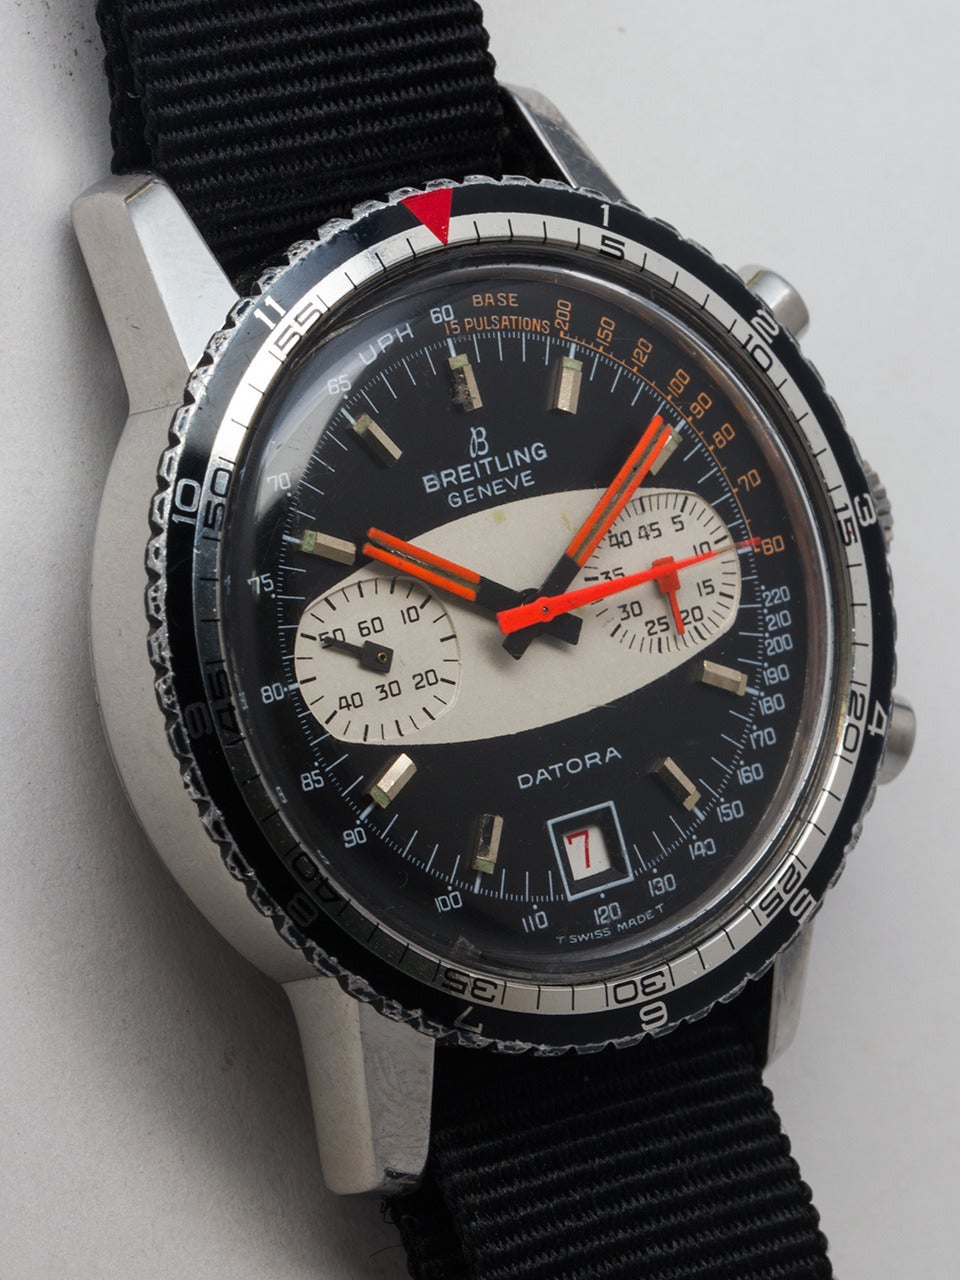 Breitling Stainless Steel Geneve Datora Wristwatch, ref 2031 circa 1970s. 39 x 48mm case with split 2 tone bezel with outer hours and inner minutes. Original black dial with contrasting white elliptical center panel, fluorescent orange painted match